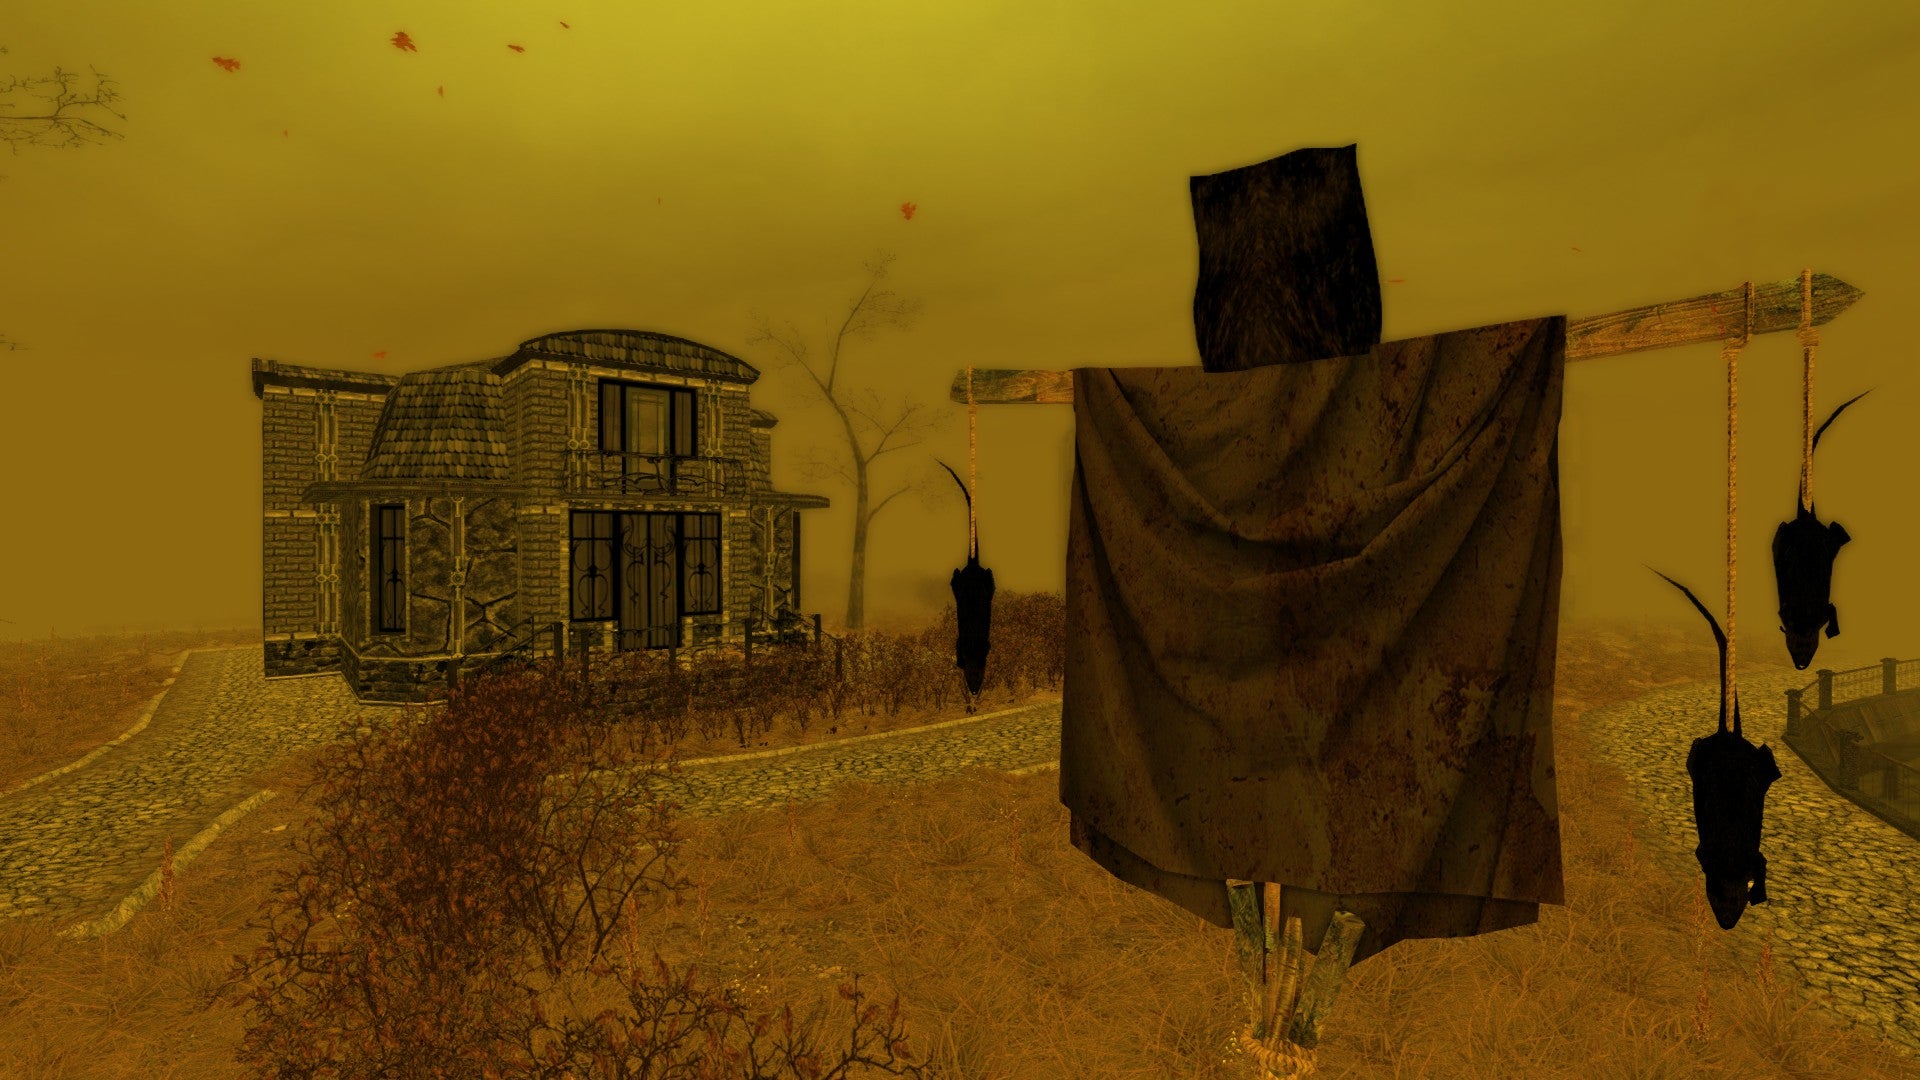 A screenshot from Pathologic showing a yellow landscape - yellow sky, yellow grass - with a squat stone home in the background and a makeshift scarecrow in the foreground, dead rats hanging from its arms